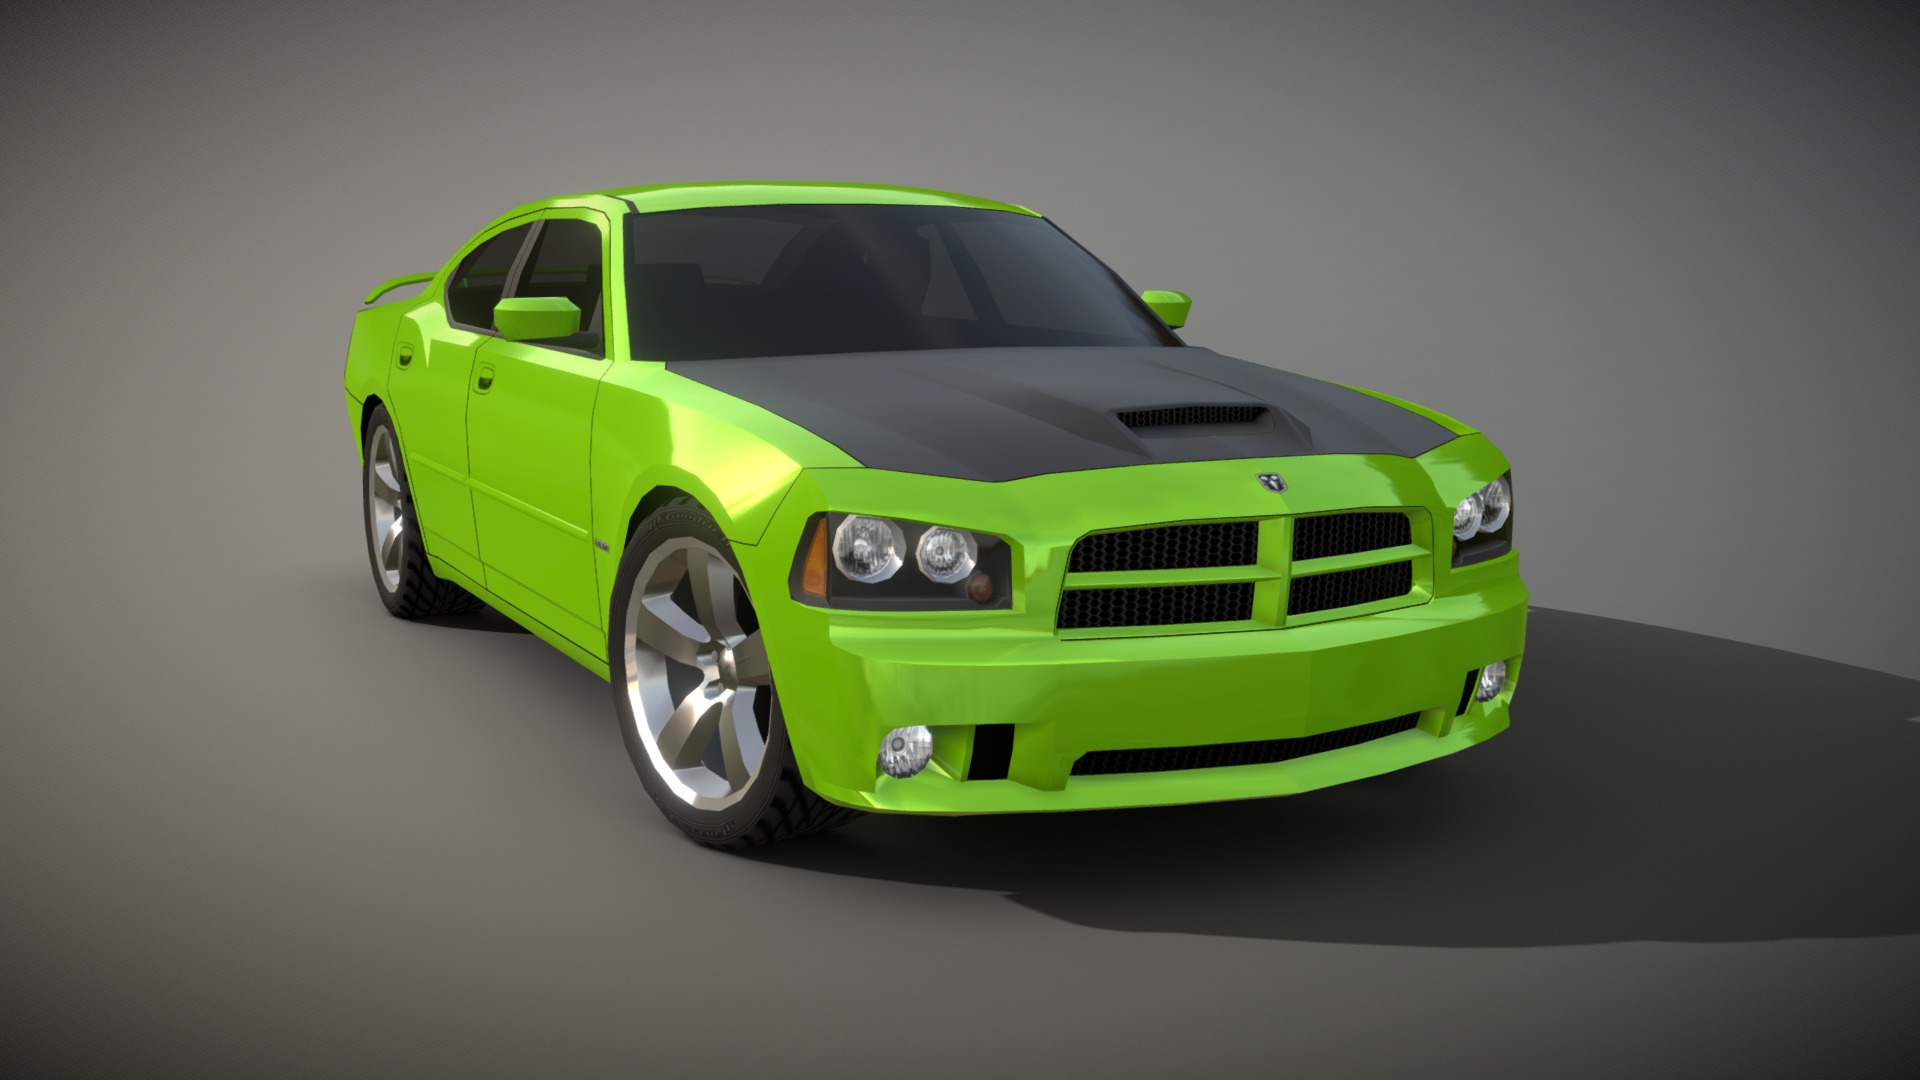 3D model 2006 Dodge Charger SRT/8 - This is a 3D model of the 2006 Dodge Charger SRT/8. The 3D model is about a green car on a white background.